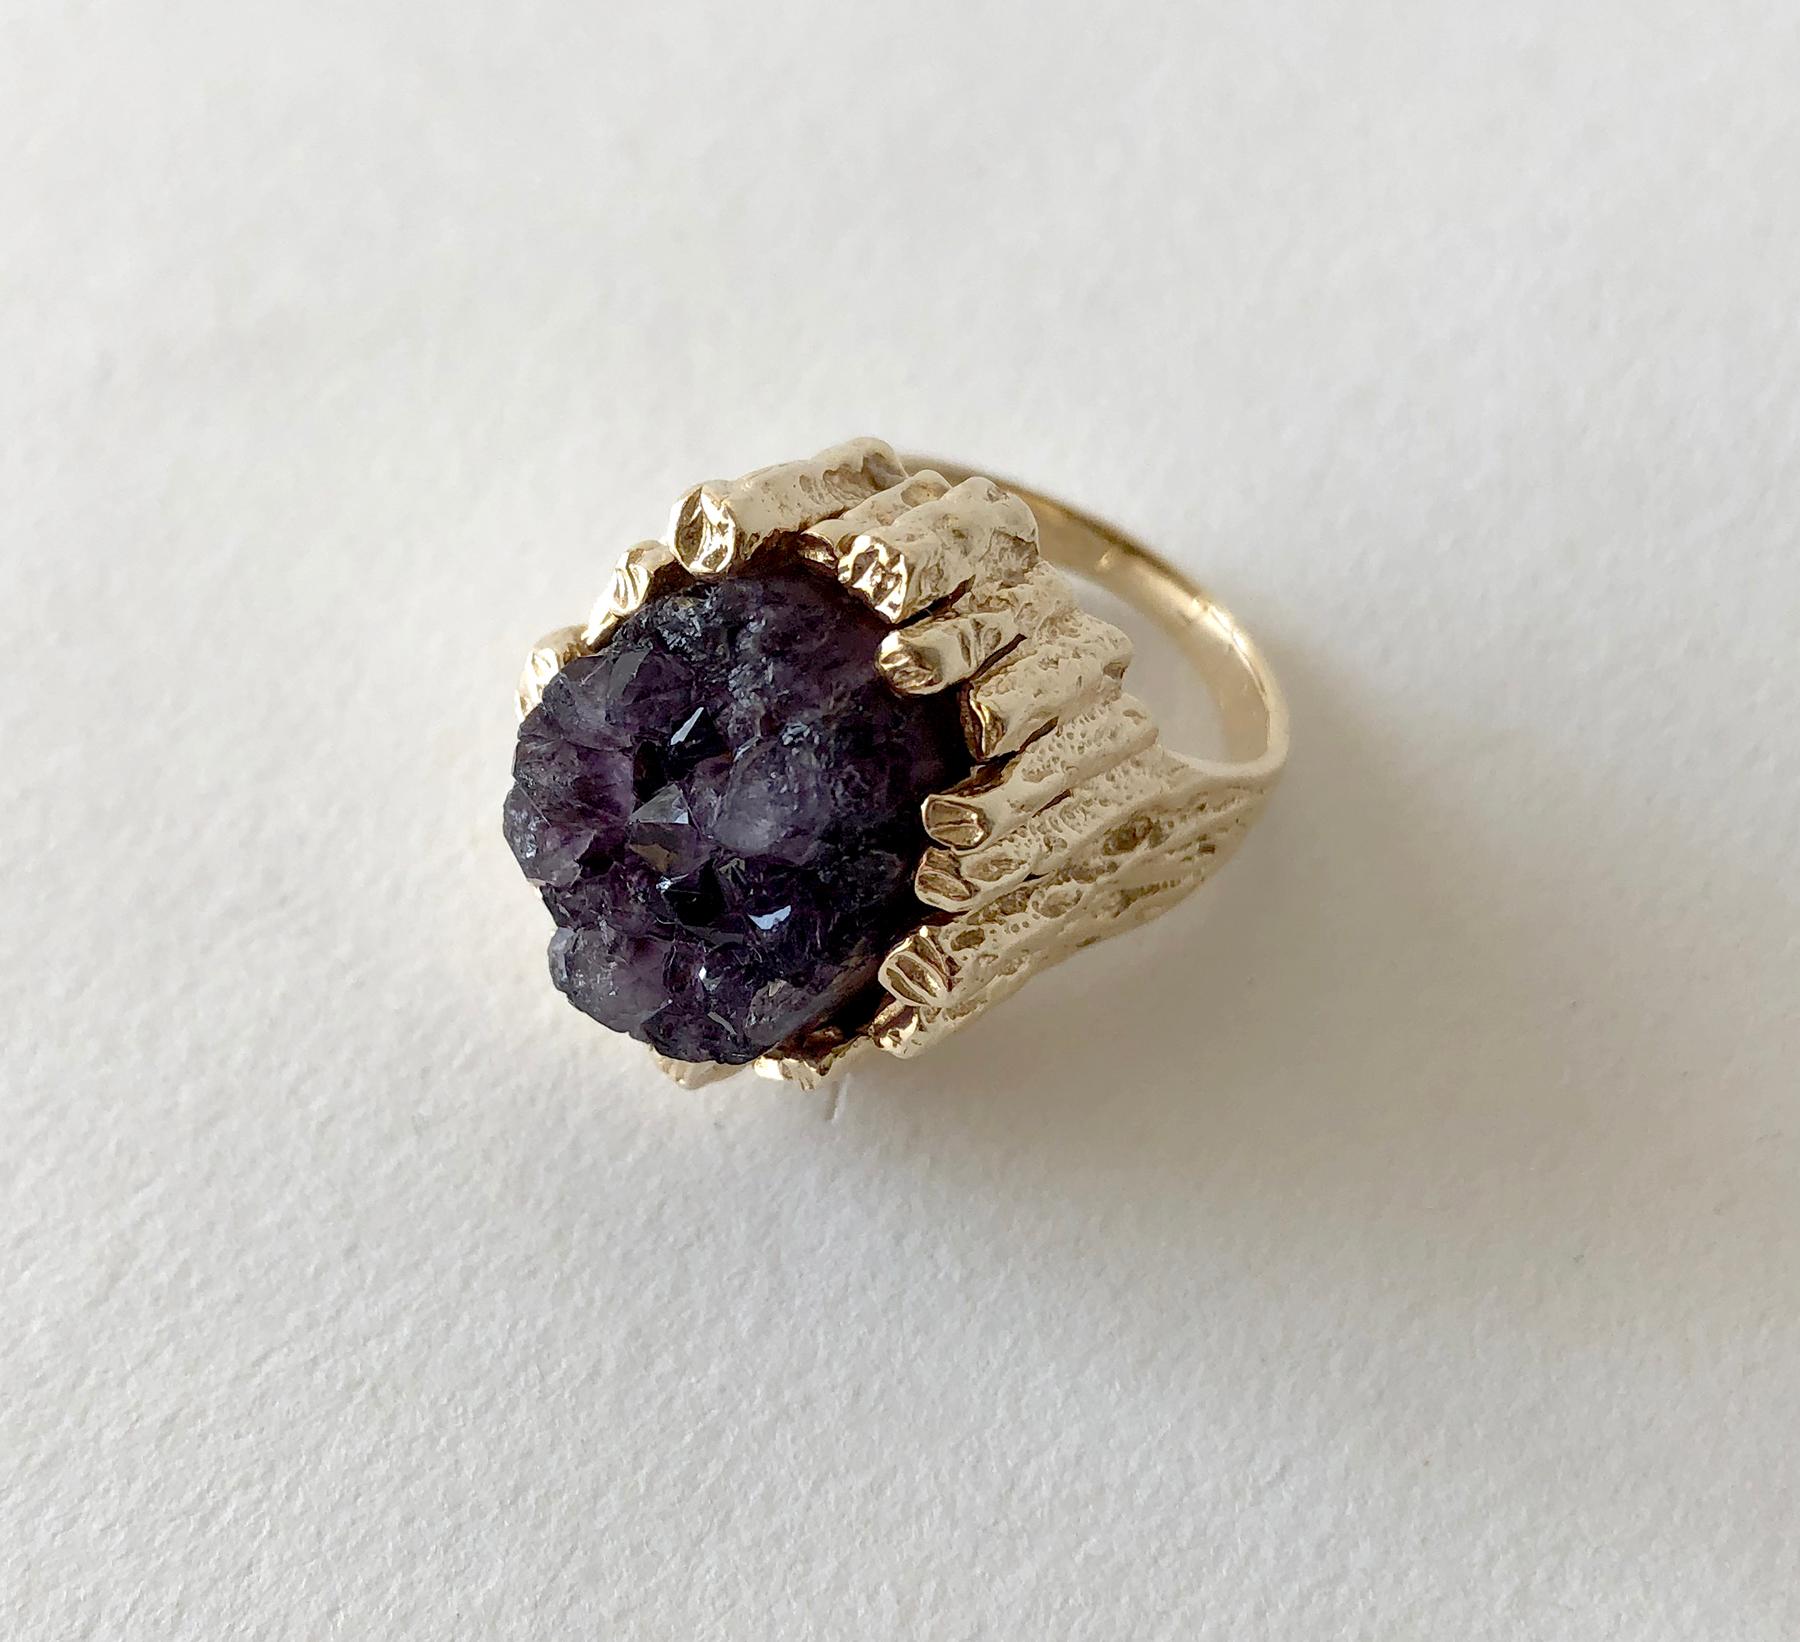 Brutalist 14K gold with dark amethyst druzy cocktail ring, circa 1970's.  Ring is a finger size 6 to 6.25 and is signed with an unknown hallmark on the interior shank.  Tests positive for 14K.  In very good vintage condition.  15.2 grams.